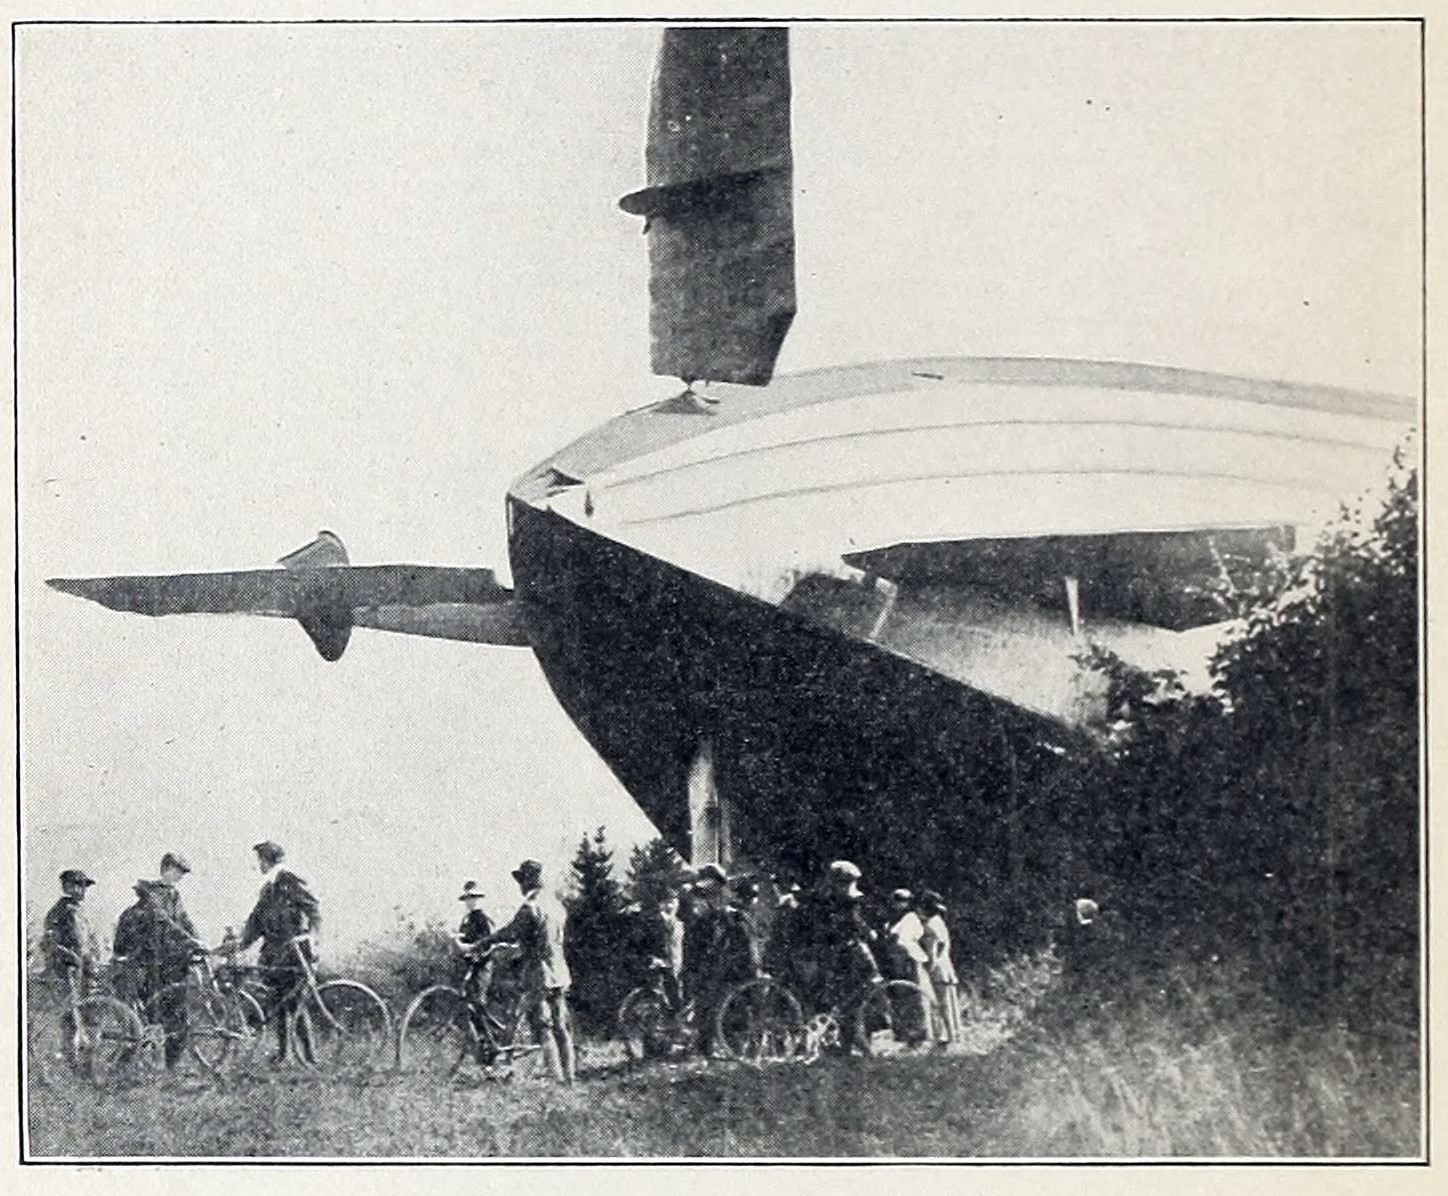 Fig. 23. Nose of Giant L-49 and Group of Sightseers